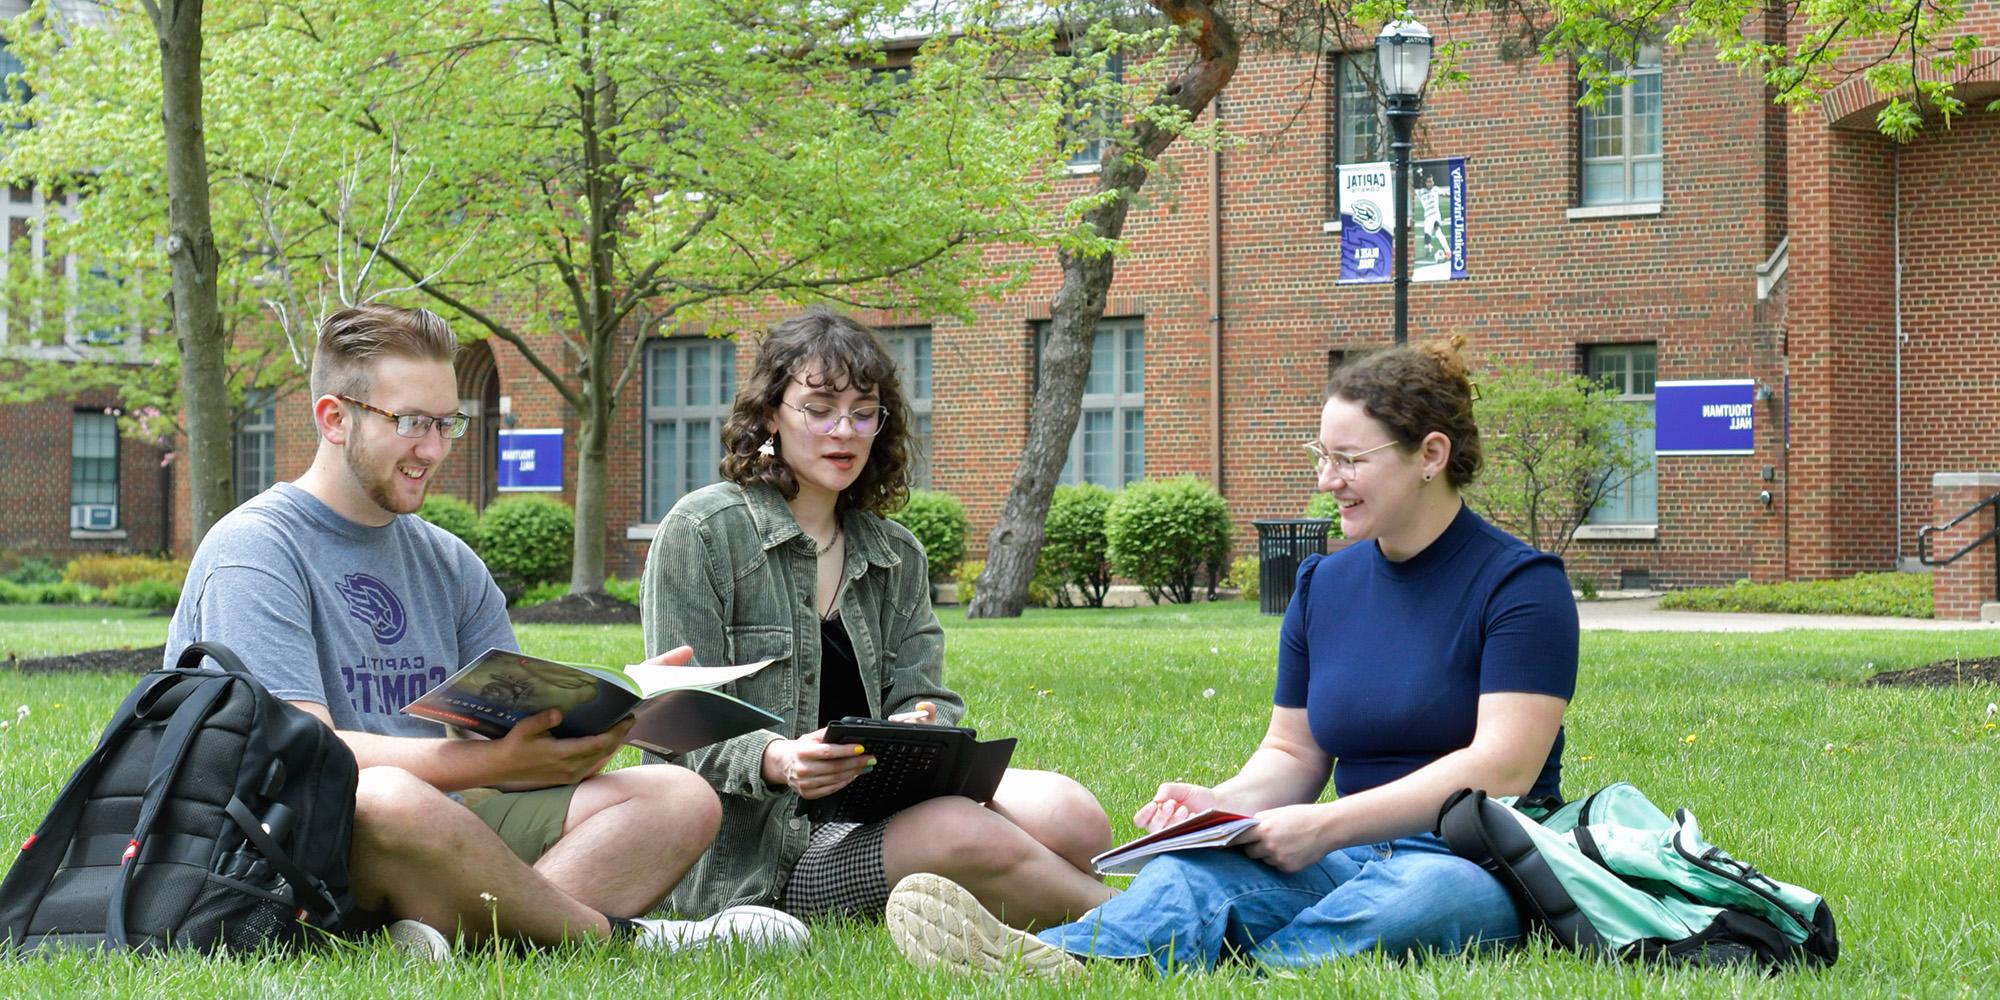 Students Sitting On Lawn In Quad (1)